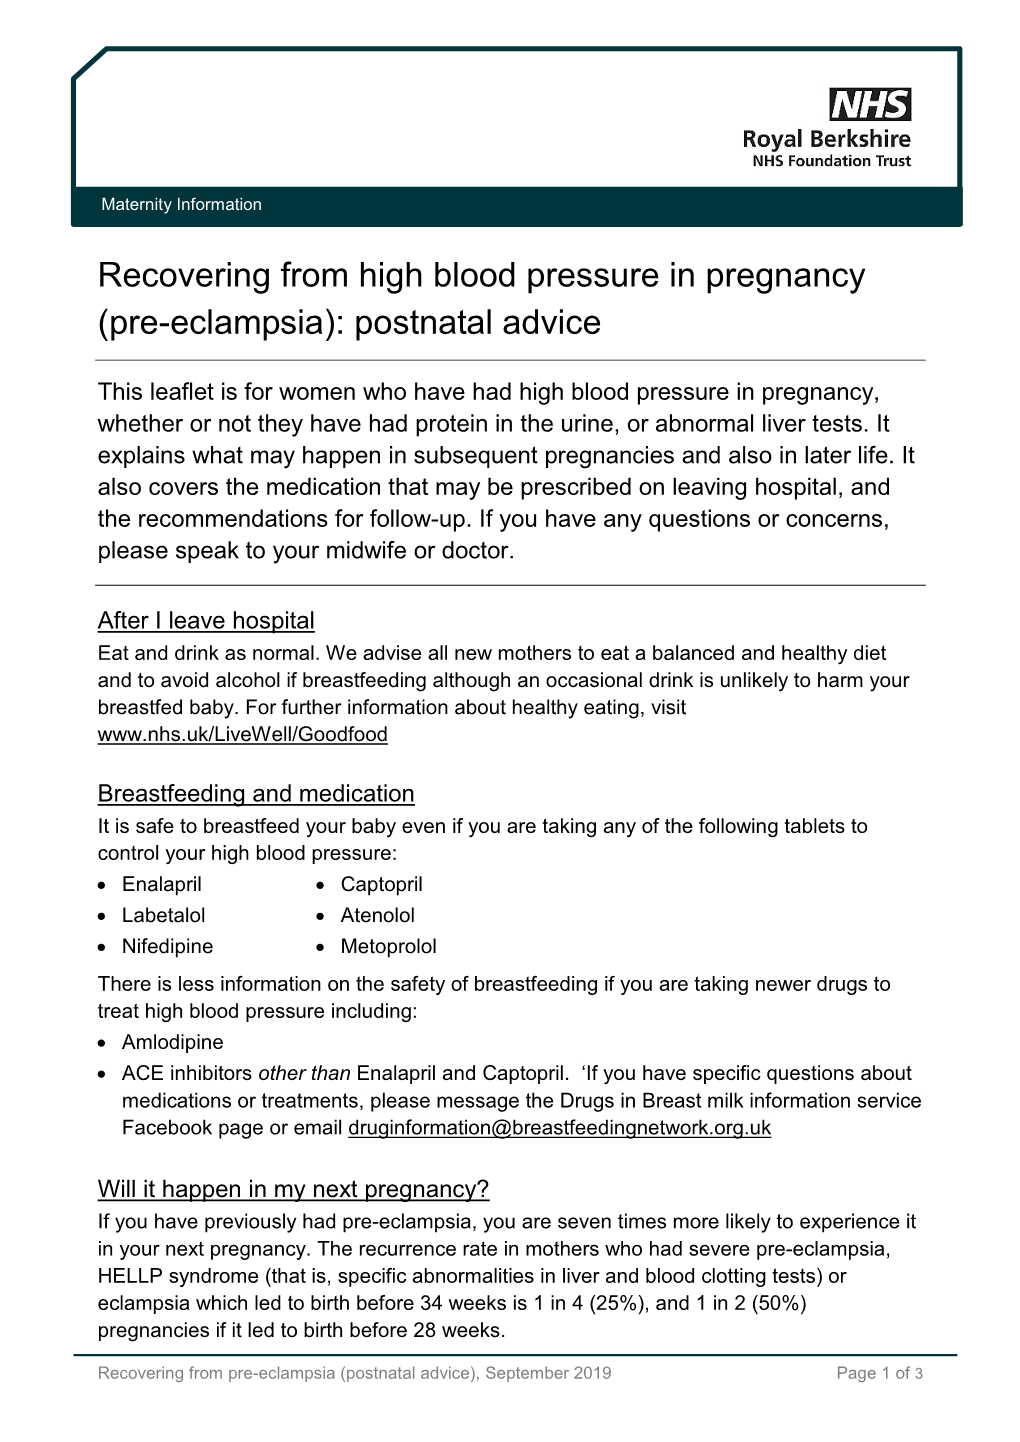 Recovering from High Blood Pressure in Pregnancy (Pre-Eclampsia): Postnatal Advice